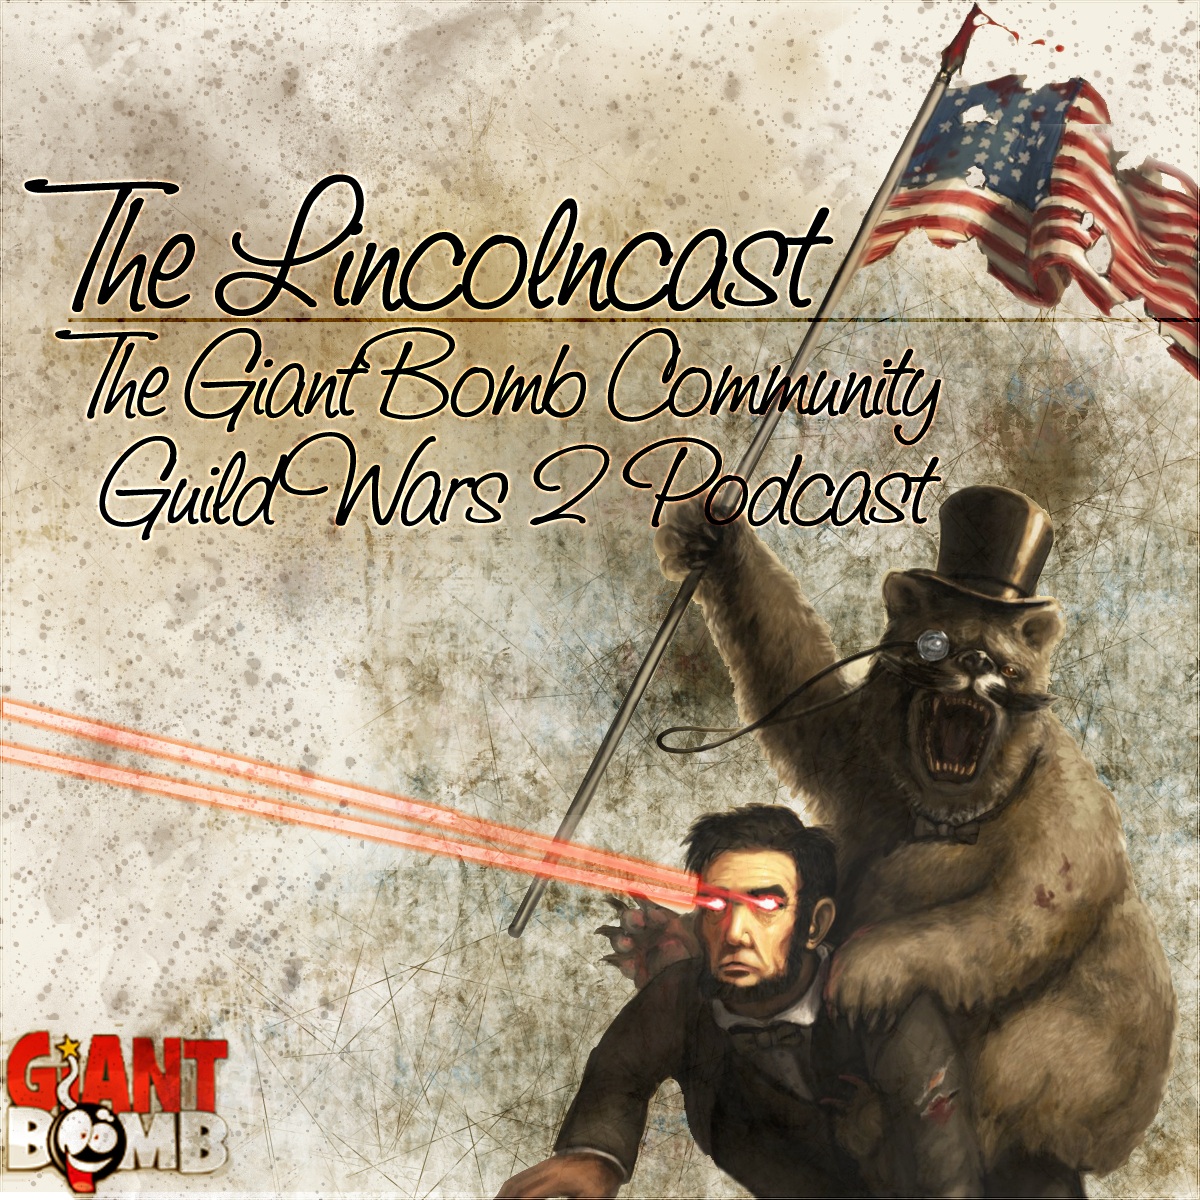 The Lincolncast Episode 15: Professions and Creepy Anime Dolls